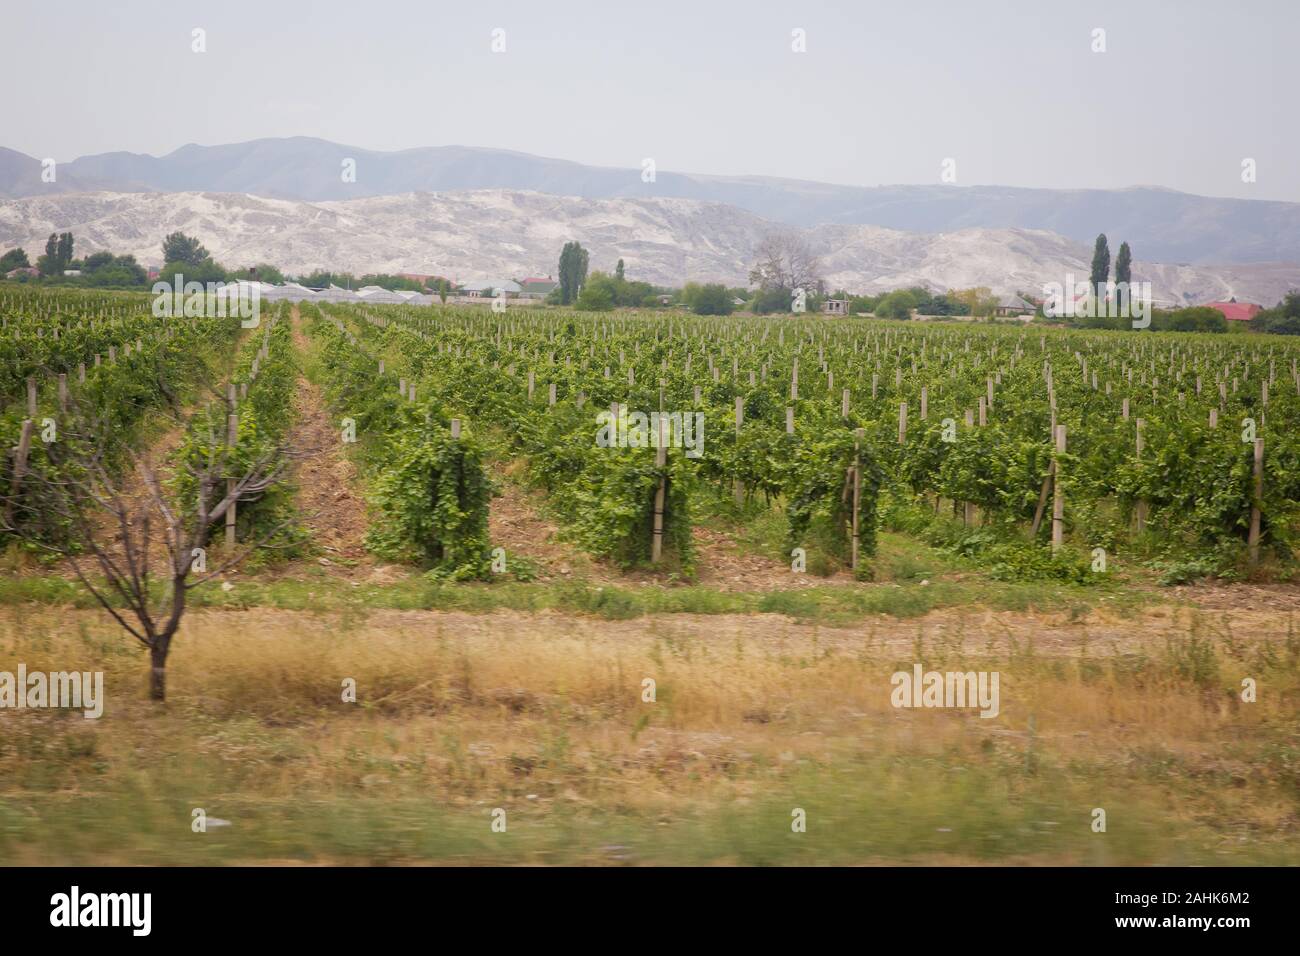 Behind the vineyard there are villages and mountains.The photo was taken in Azerbaijan when there was no sunshine. Grapes field . Beautiful landscape Stock Photo